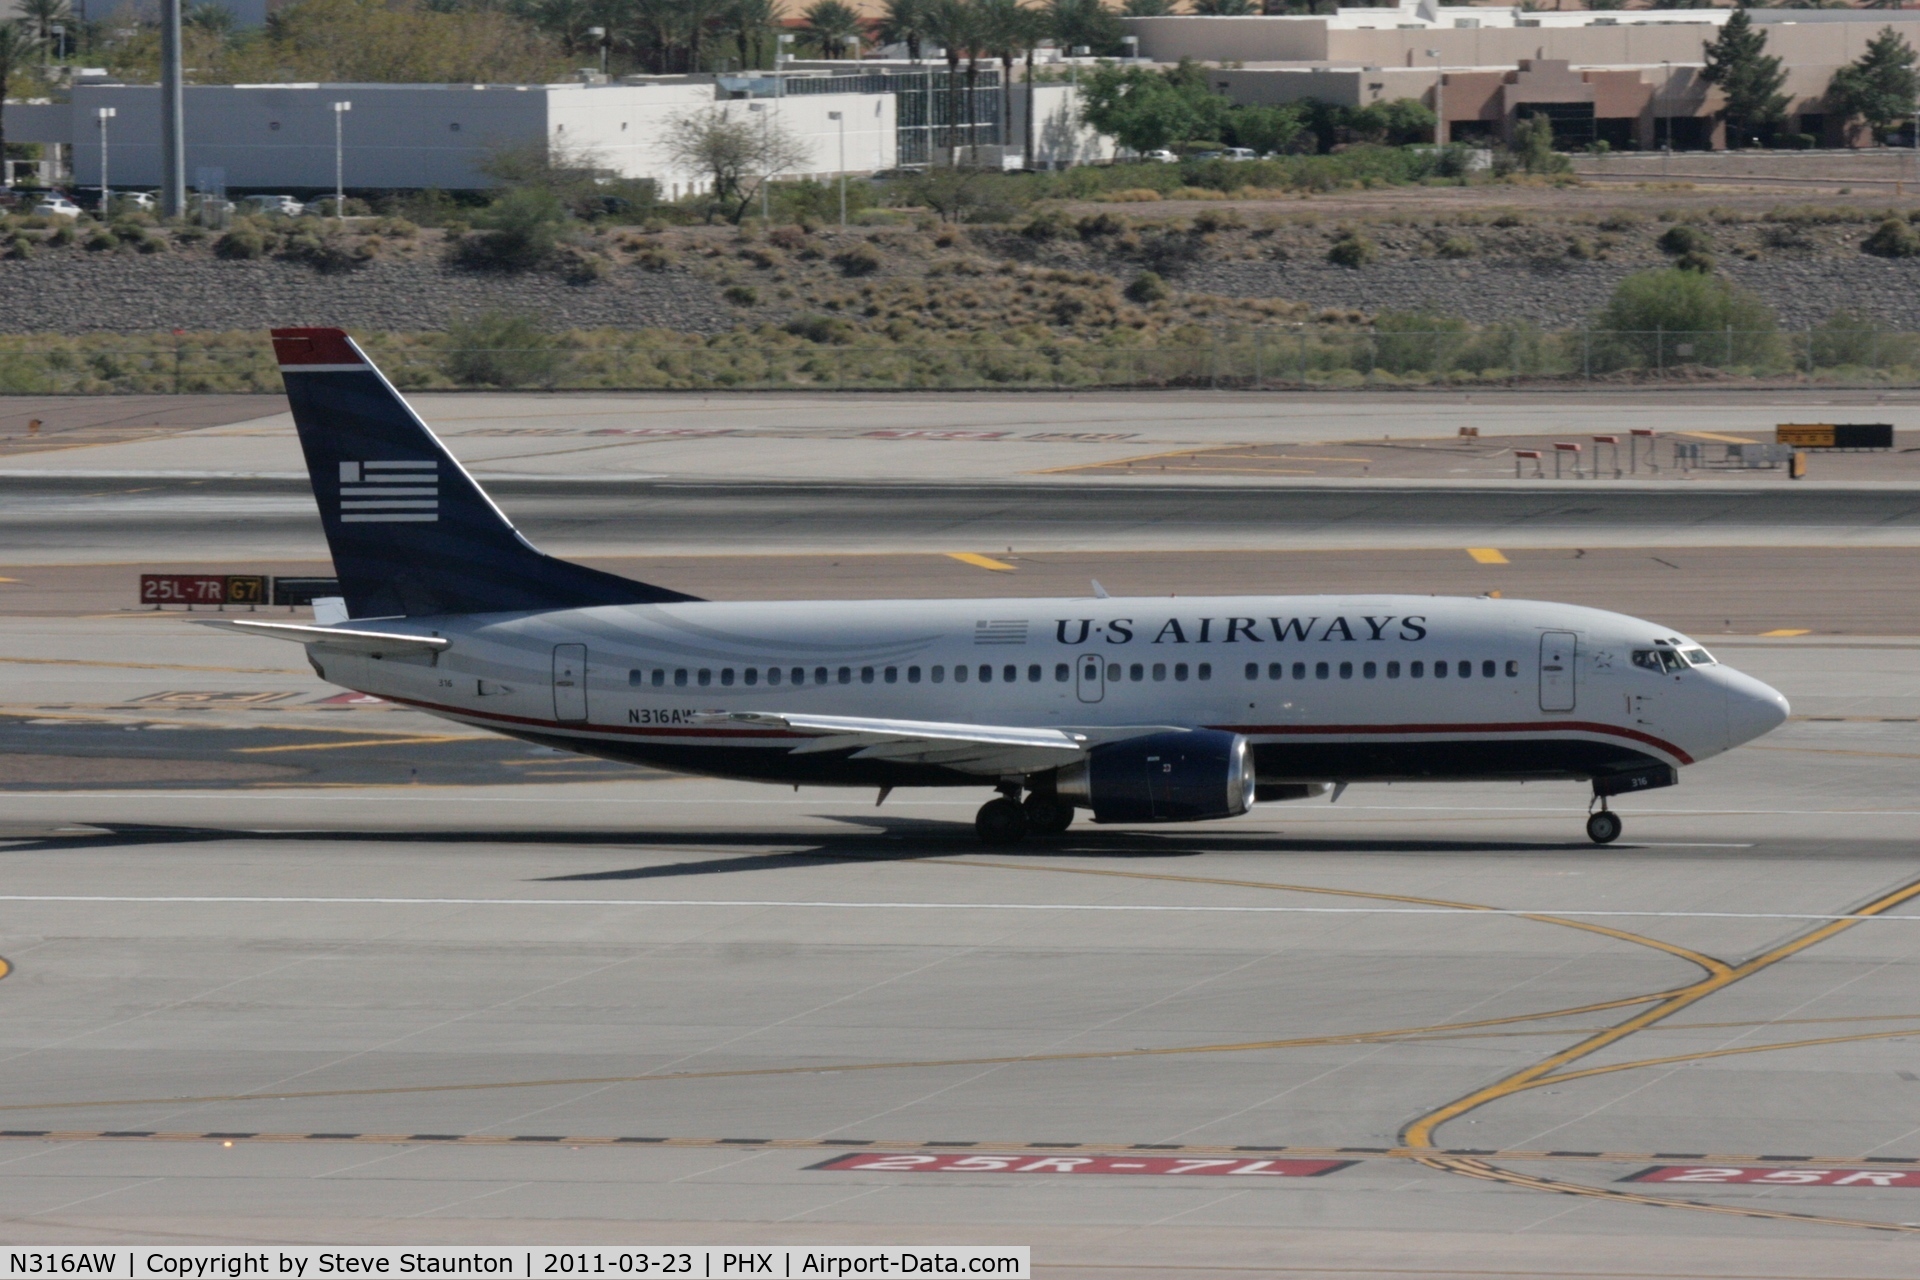 N316AW, 1987 Boeing 737-3S3 C/N 23713, Taken at Phoenix Sky Harbor Airport, in March 2011 whilst on an Aeroprint Aviation tour